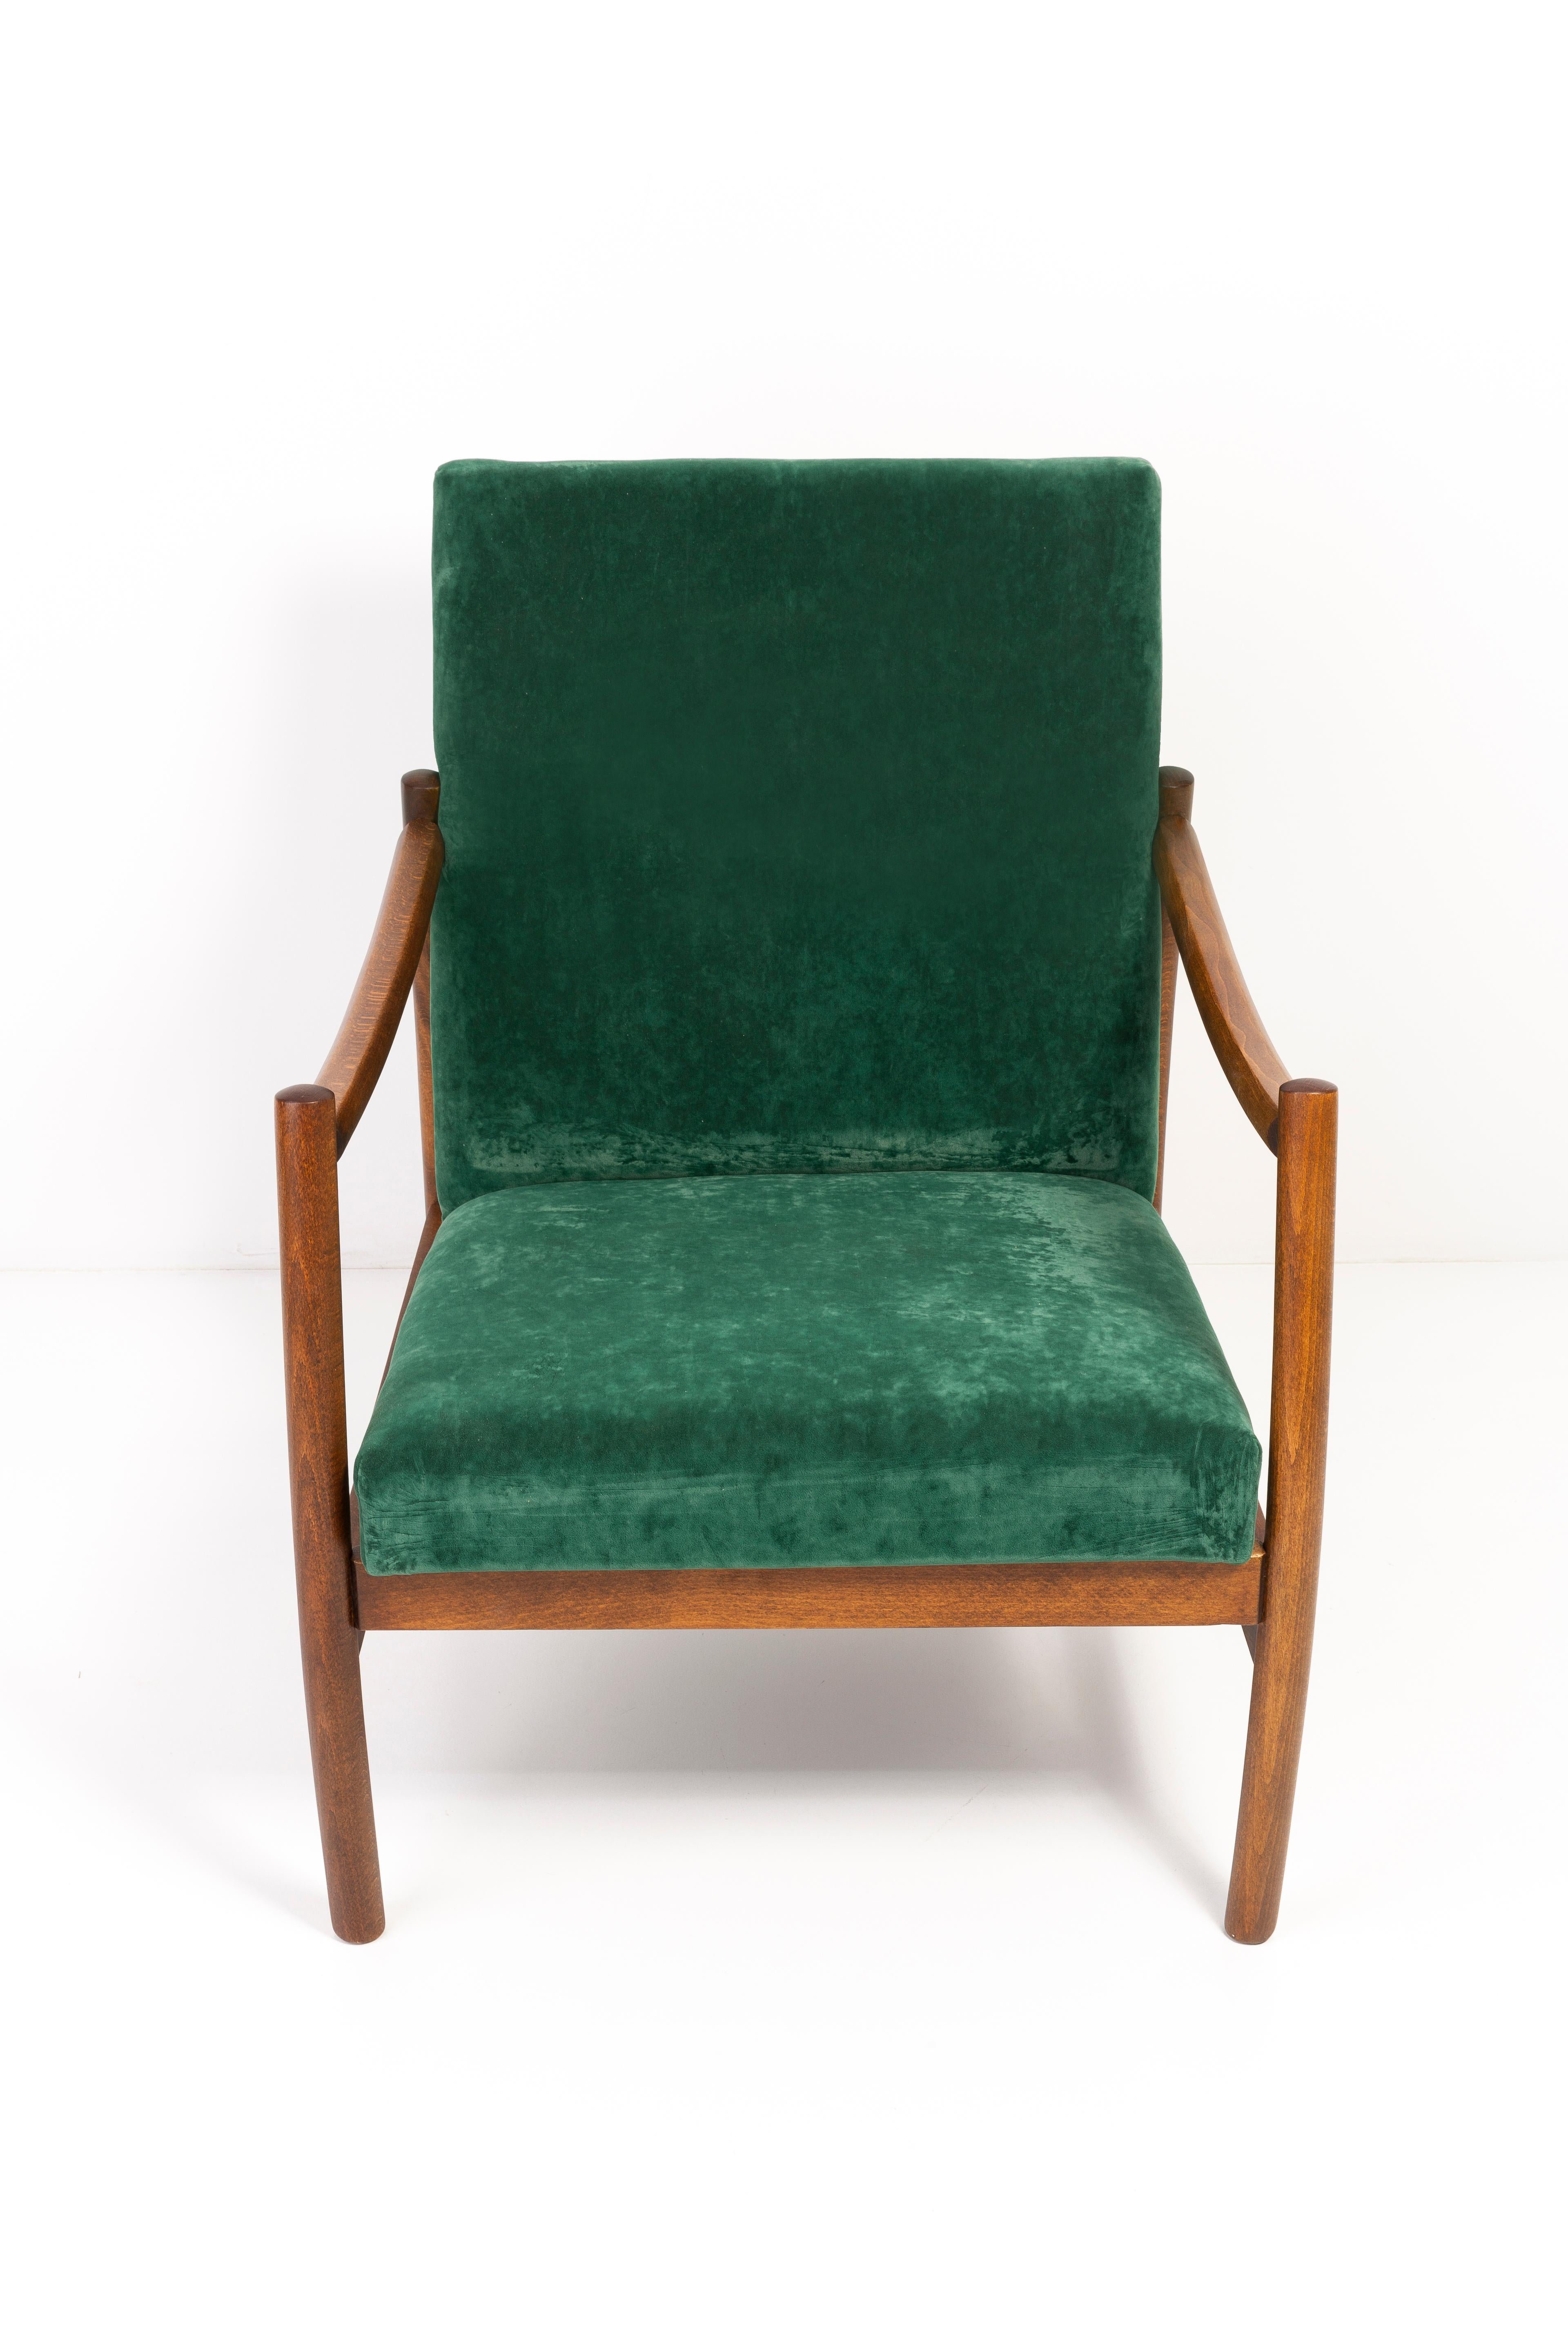 Set of Two Mid-20th Century Vintage Armchairs, Dark Green Velvet, Europe, 1960s For Sale 8